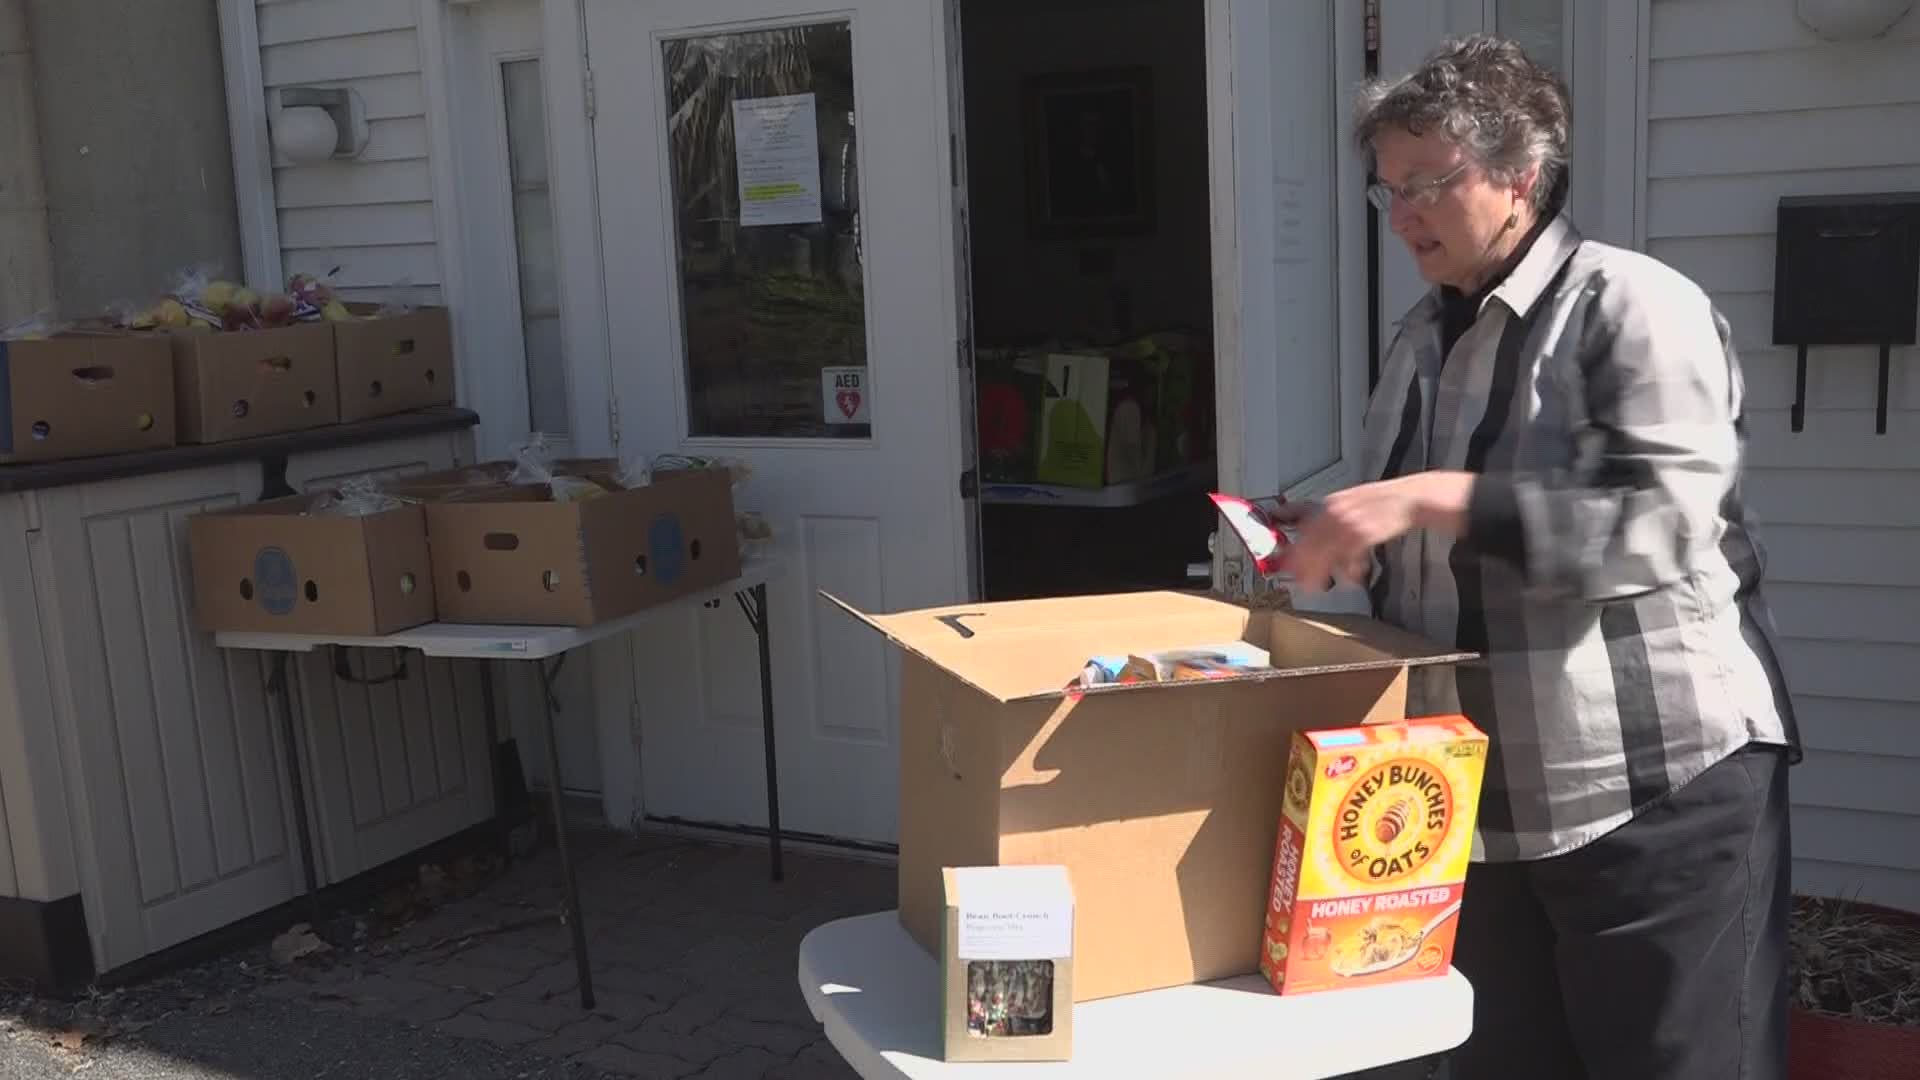 The Hampden Neighborhood Food Cupboard is making a big difference for hungry families amid coronavirus